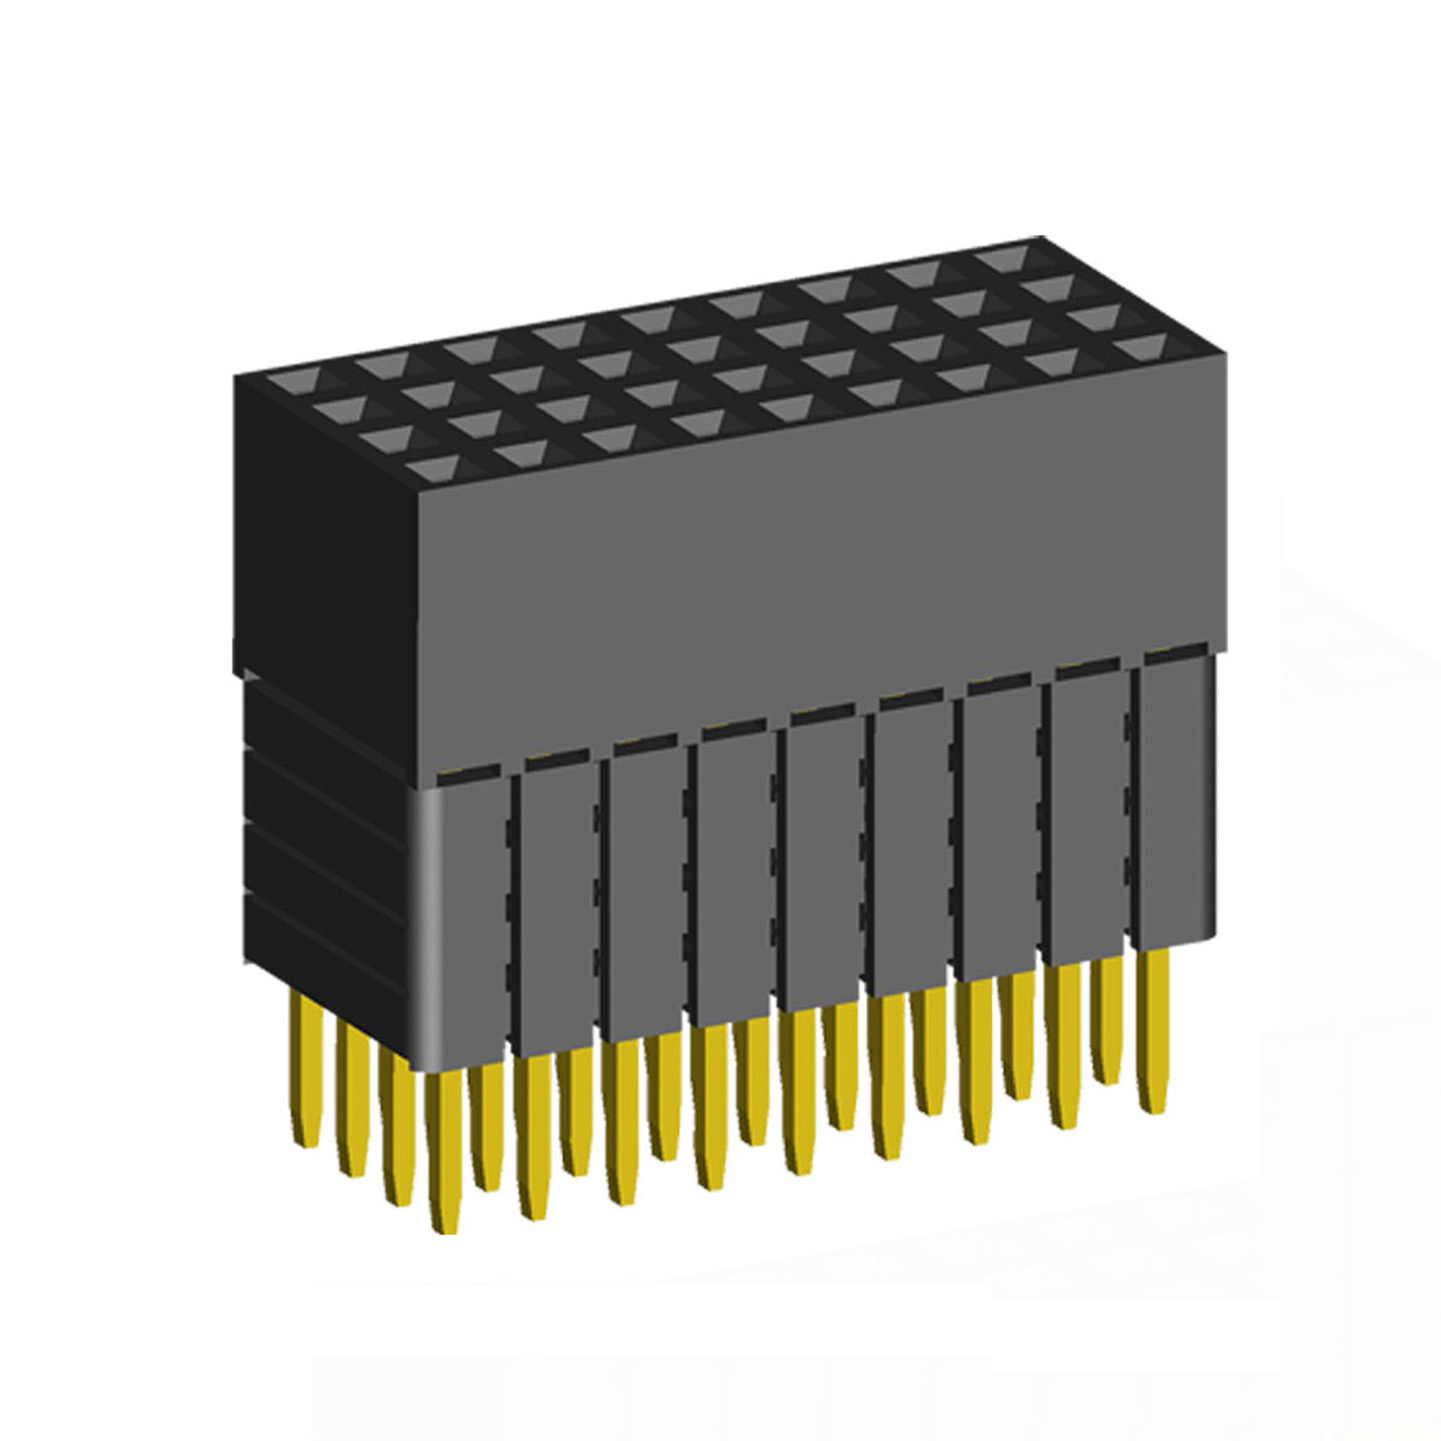 1999SDI-XXXG-4B series, four-row sockets straight to the Board for mounting holes, pitch 2,0x2,0 mm, Board-to-Board connectors, pin headers and sockets > pitch 2,0x2,0 mm